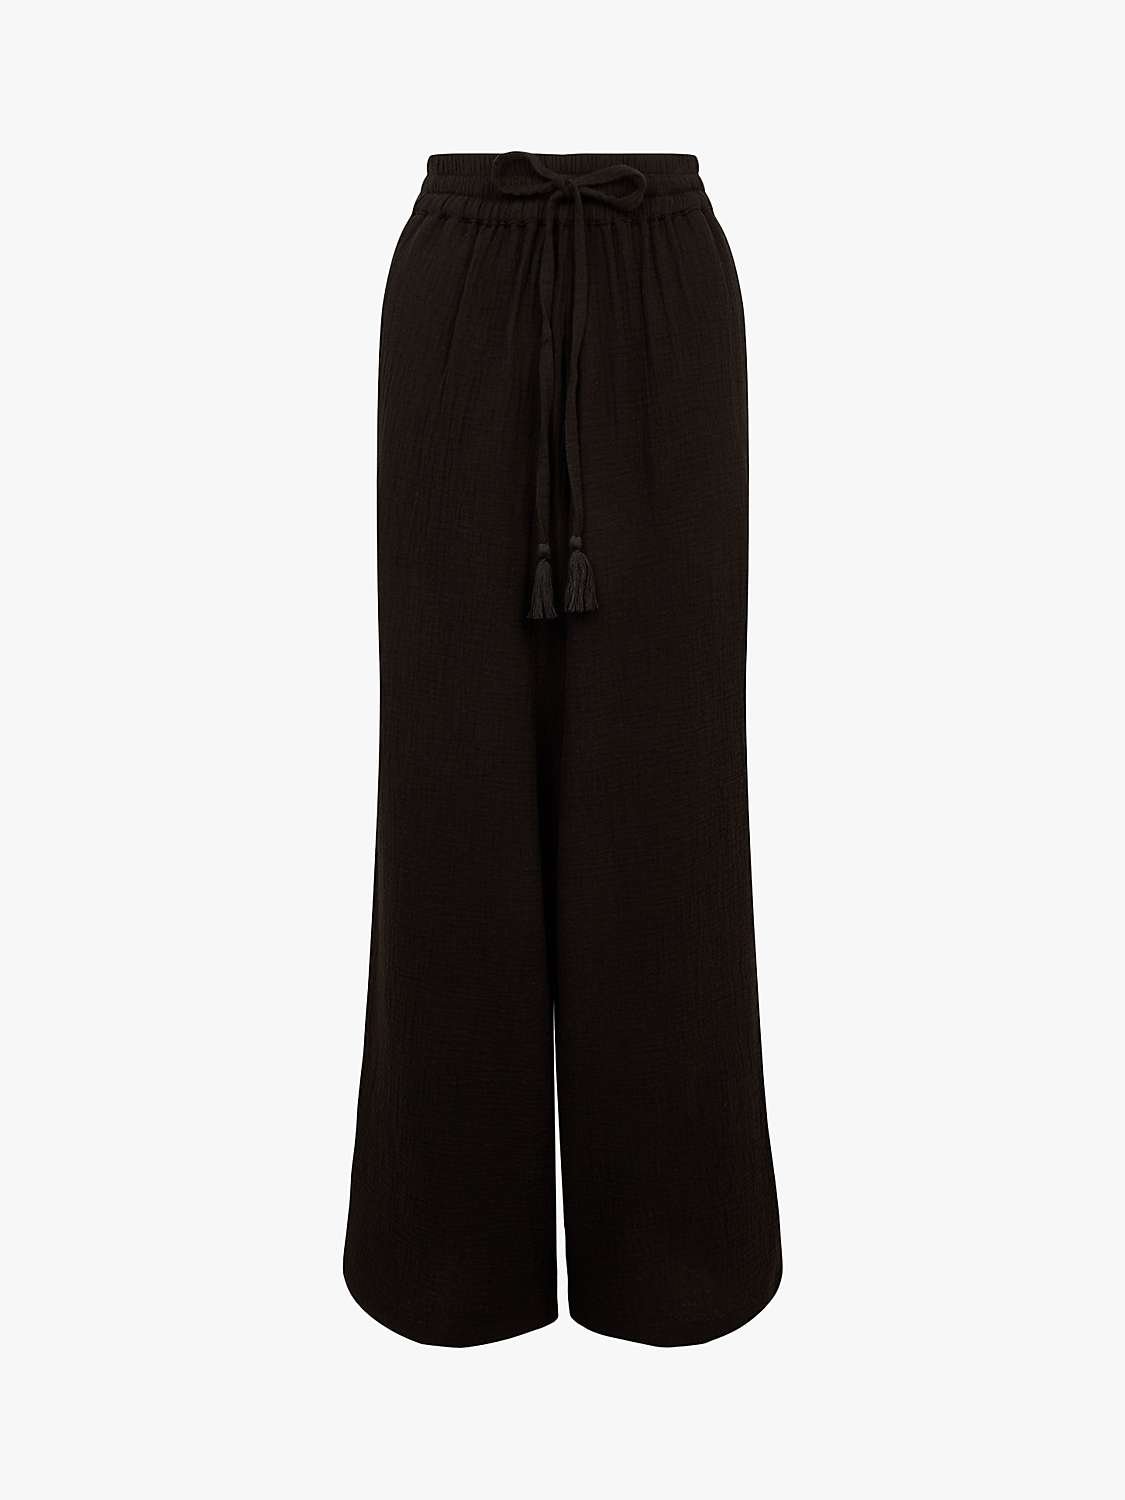 Buy Accessorize Crinkle Cotton Beach Trousers, Black Online at johnlewis.com